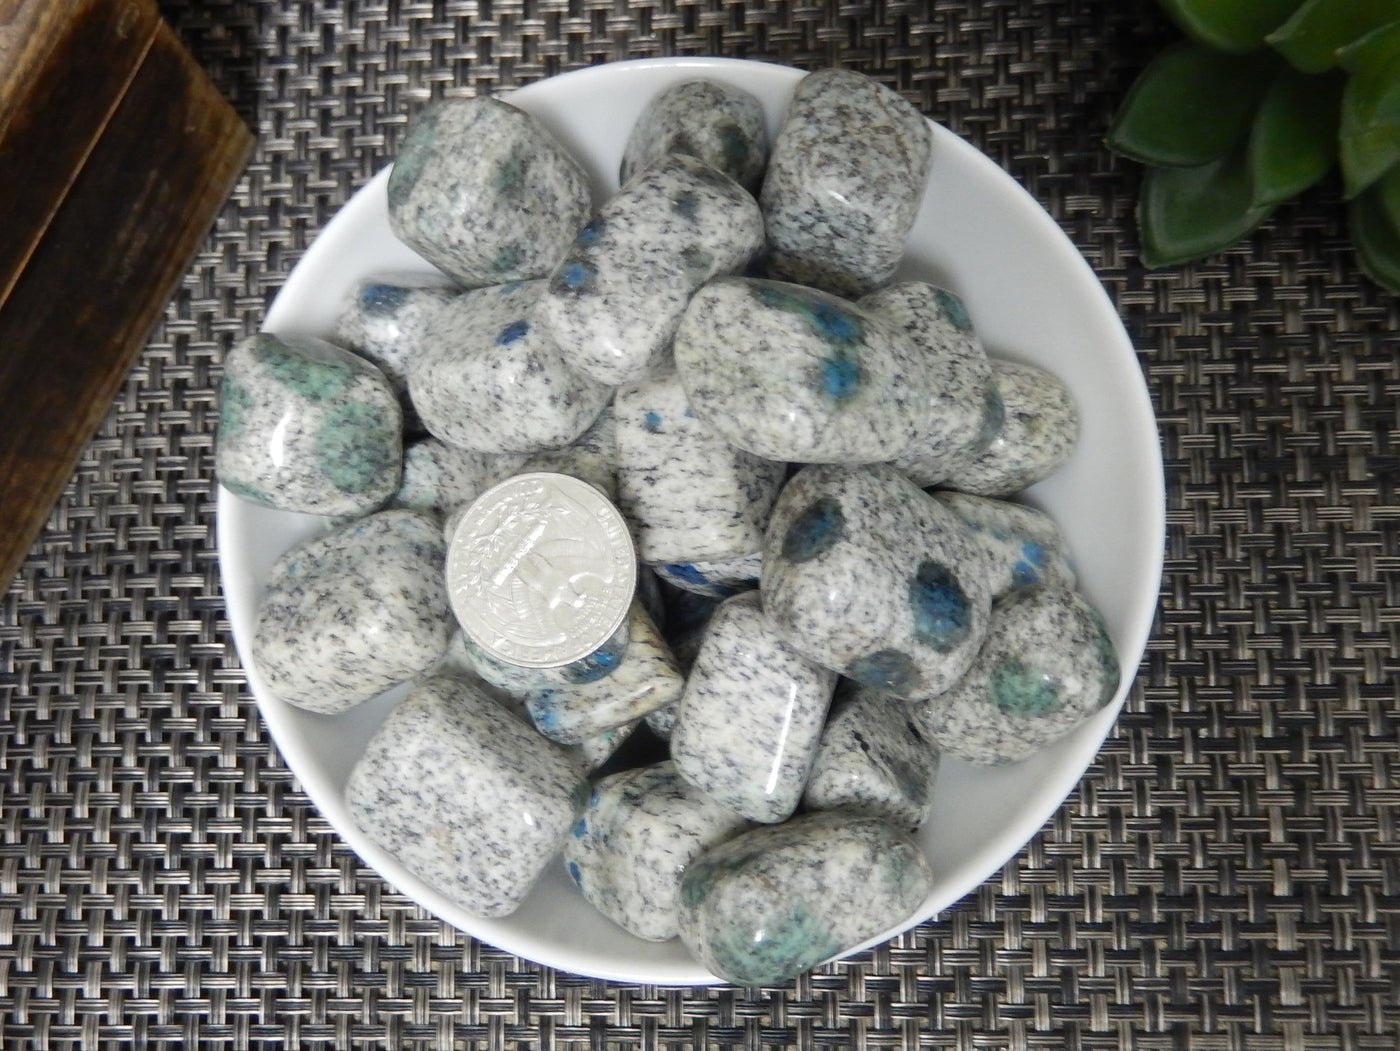 granite/jasper tumbled stones in a bowl with a quarter for size reference